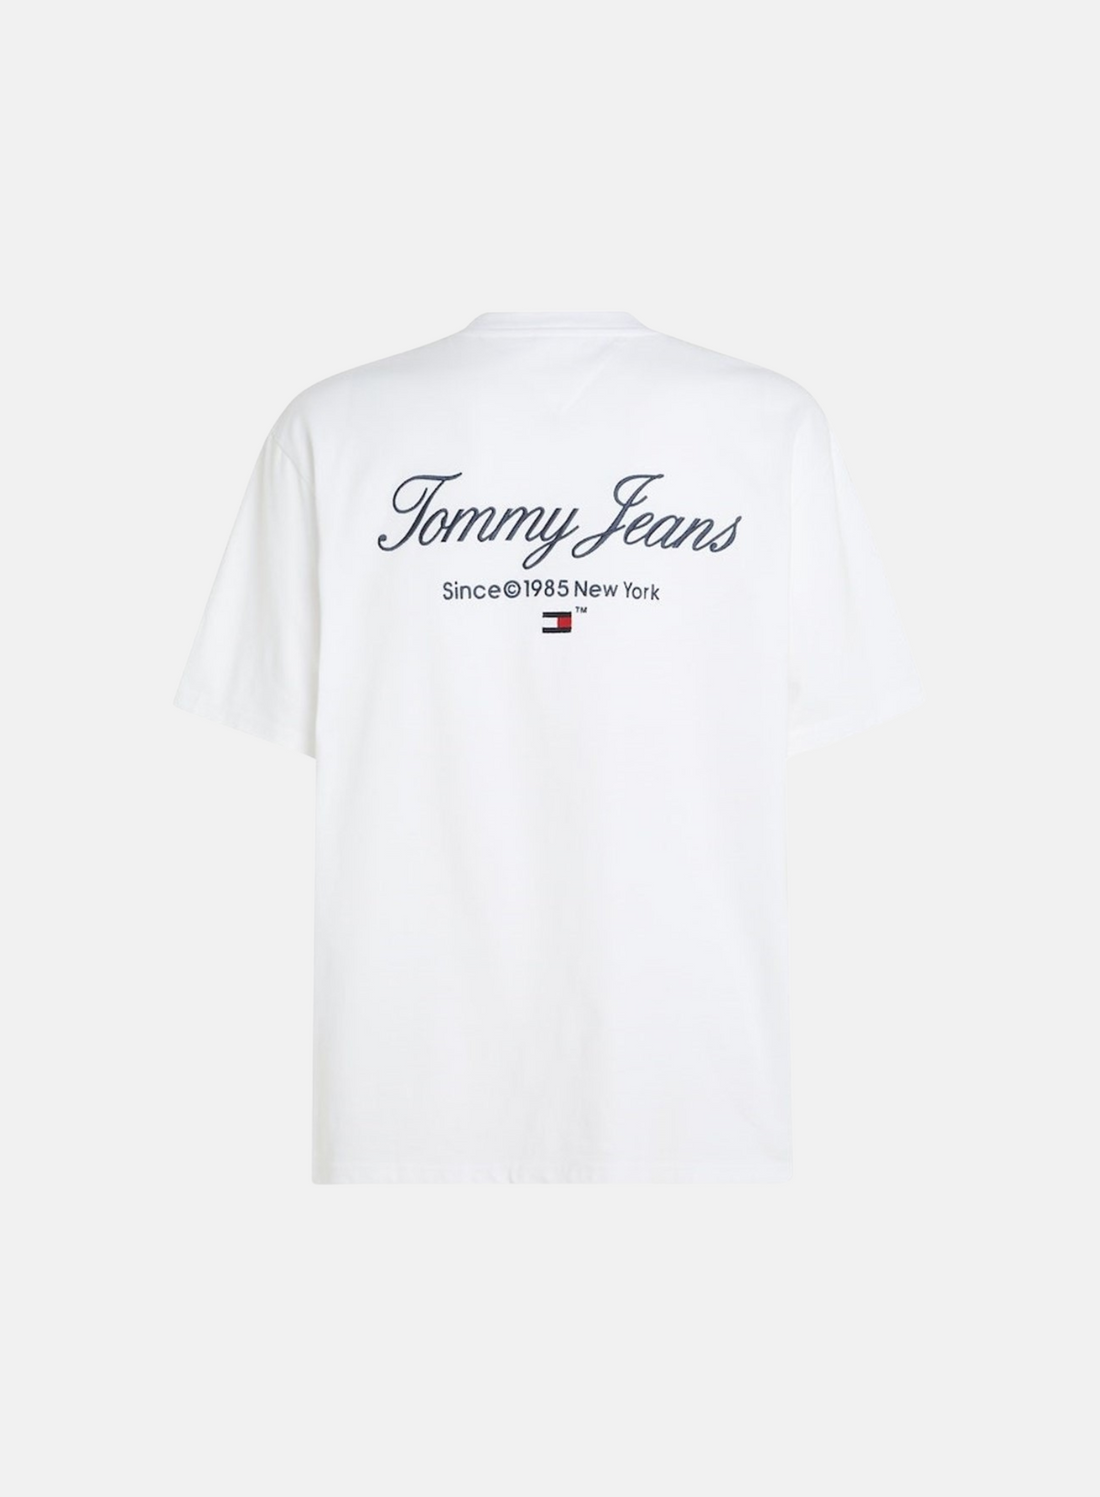 Tommy Jeans Classic Oversized Serif Tee White - Hympala Store 